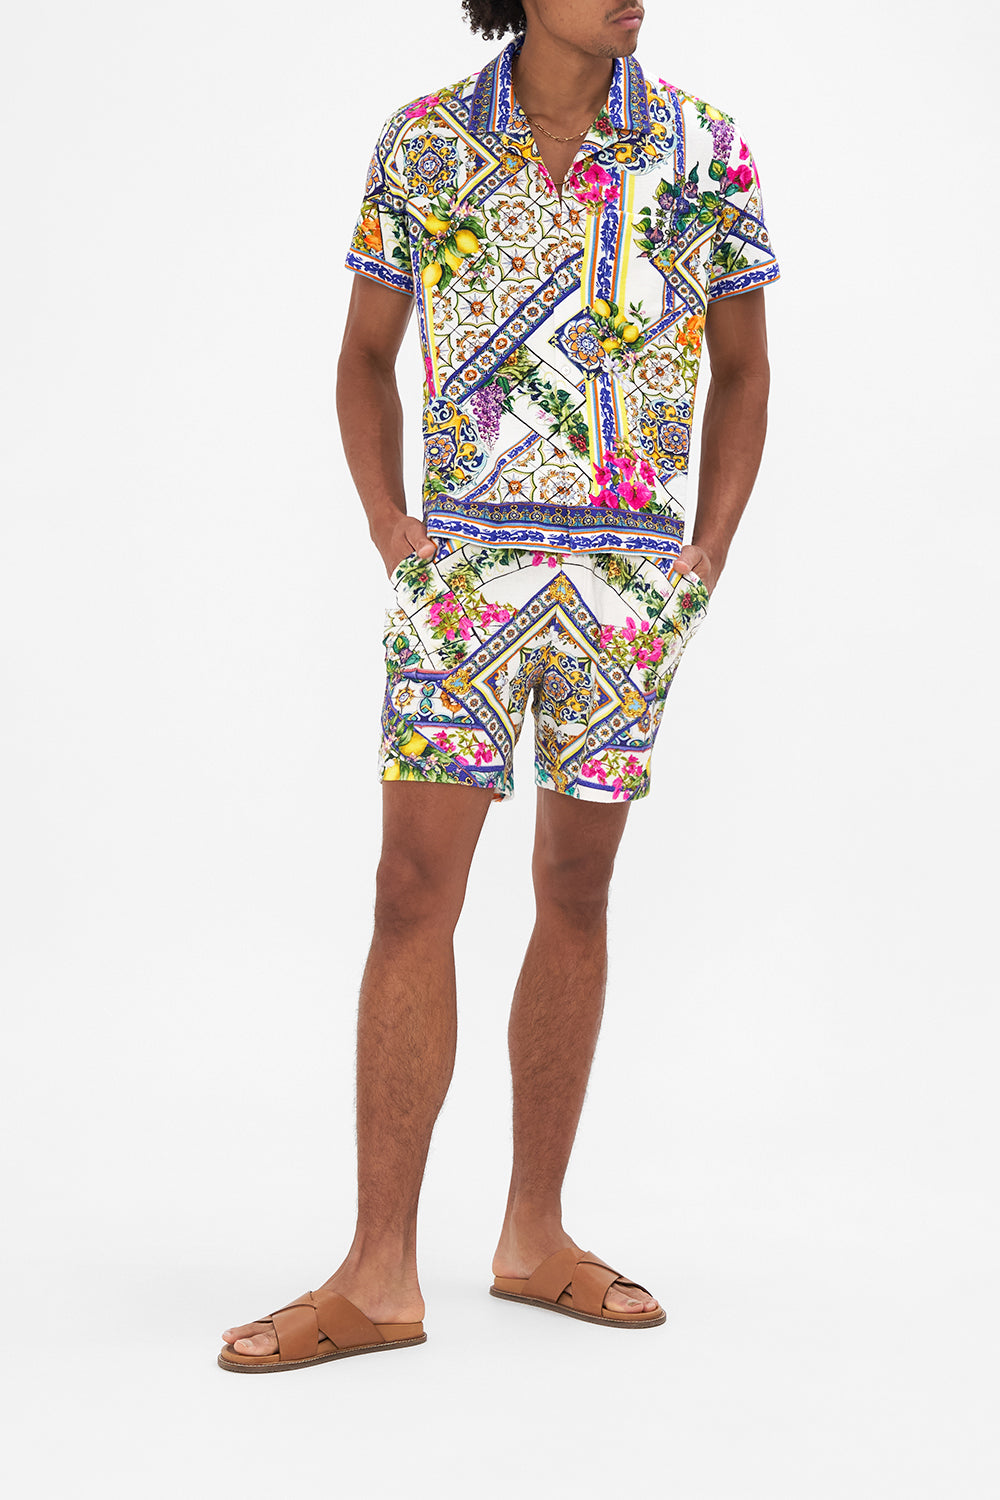 Front view of model wearing HOTEL FRANKS BY CAMILLA elasticated mens short in Amalfi Amore print